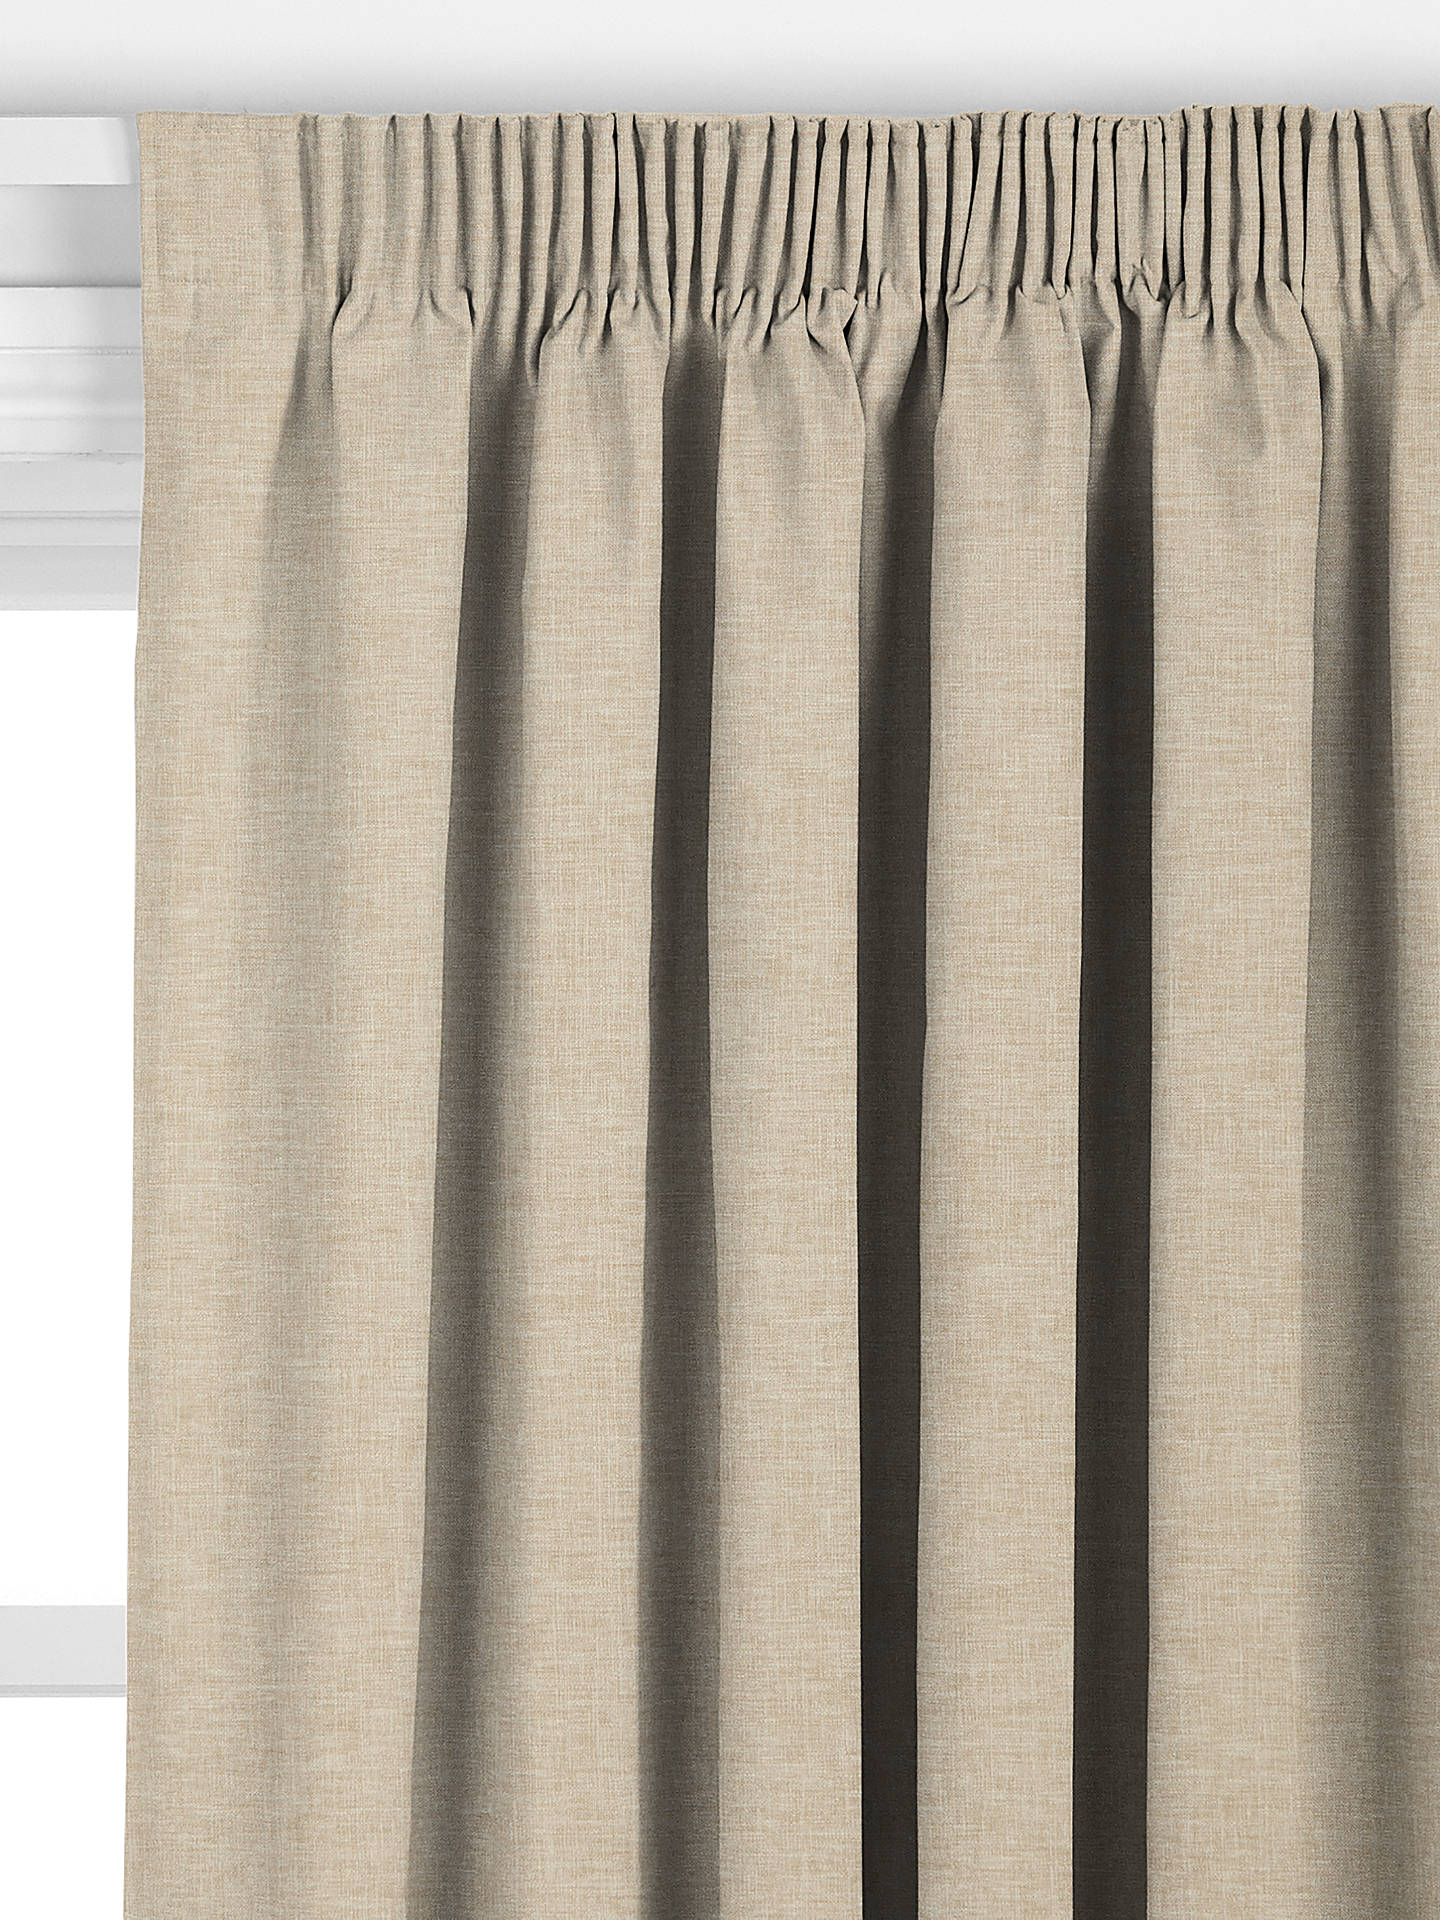 John Lewis Cotton Blend Biscuit Made to Measure Curtains, Natural